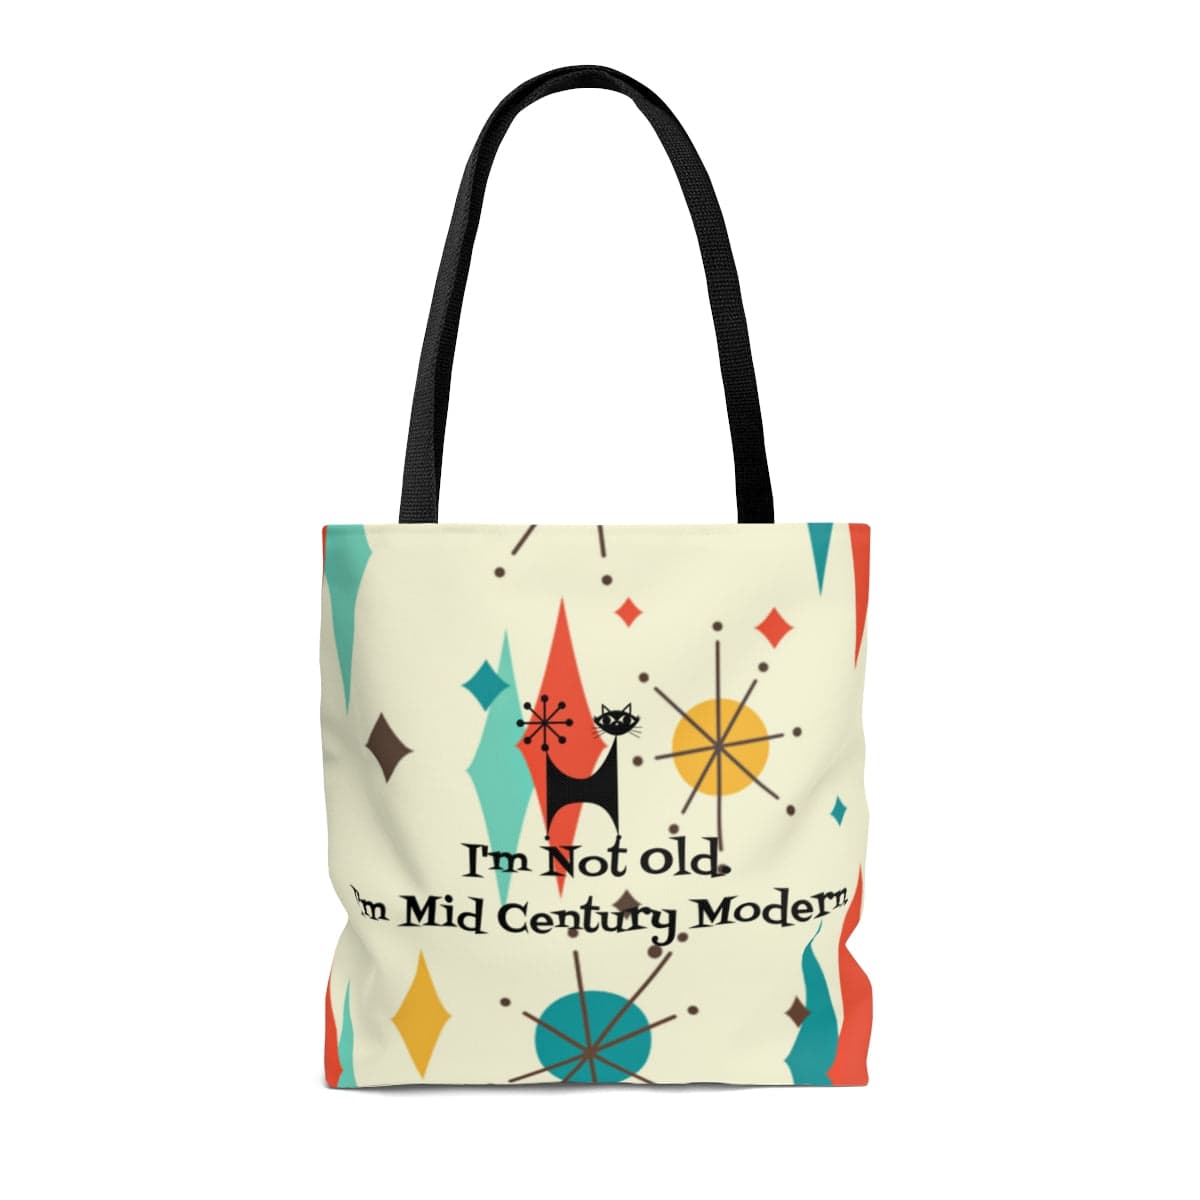 I'm Not Old, I'm Mid Century Modern (™) Atomic Kittie Cat, Starburst Grocery, Travel, Every Day Tote Bag Bags